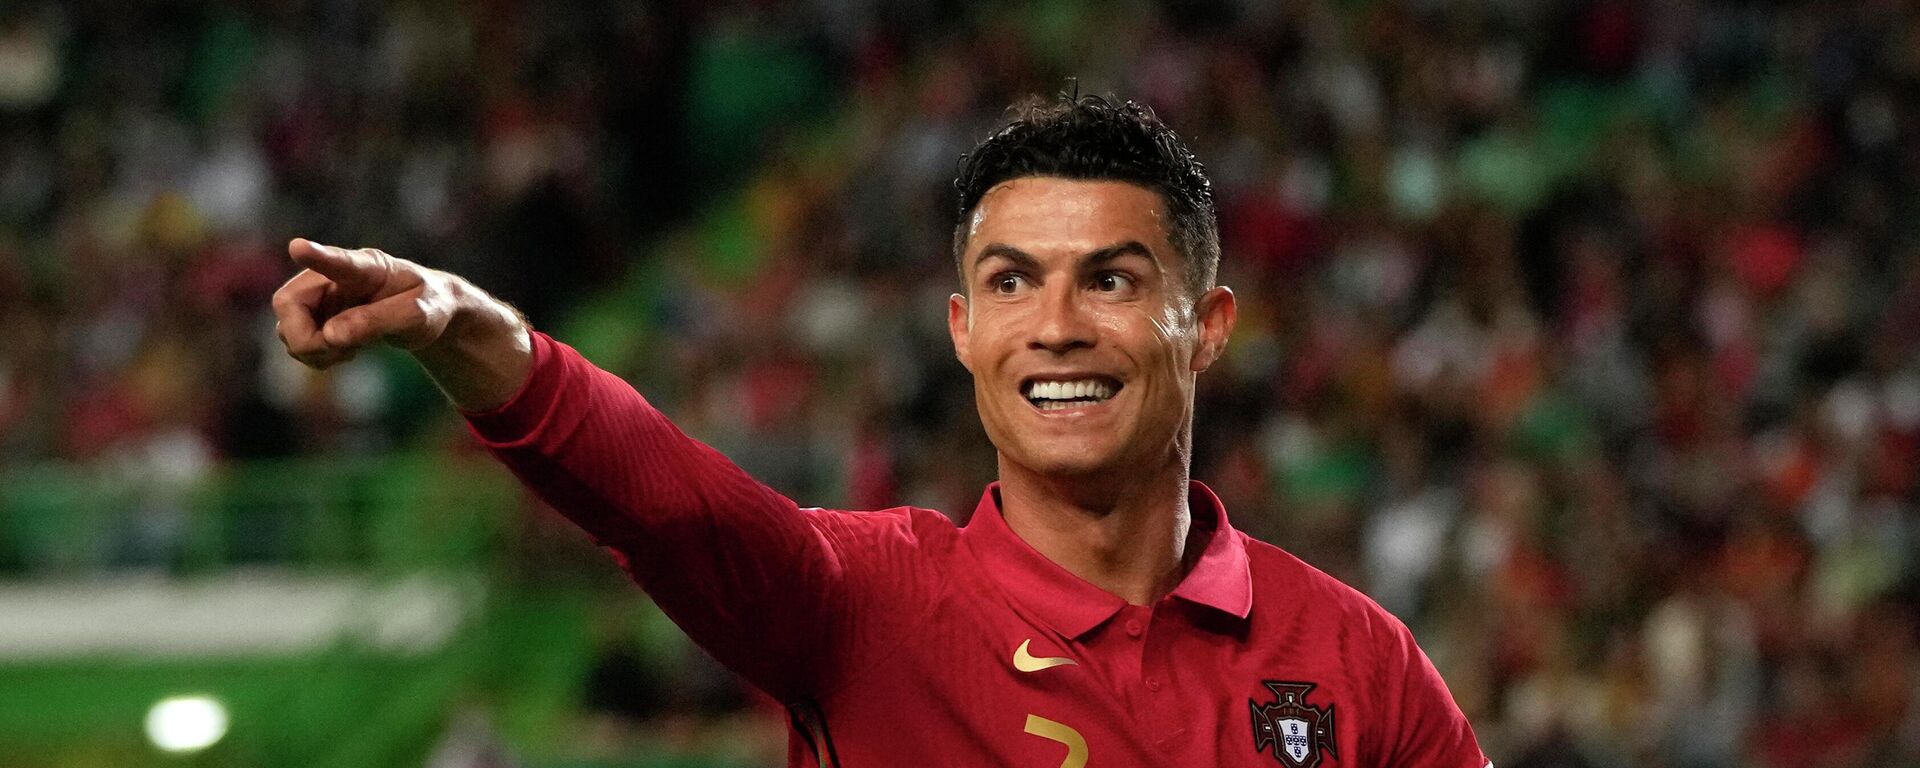 Portugal's Cristiano Ronaldo gestures during the UEFA Nations League soccer match between Portugal and Switzerland, at the Jose Alvalade Stadium in Lisbon, Portugal, Sunday, June 5, 2022 - Sputnik International, 1920, 14.07.2022